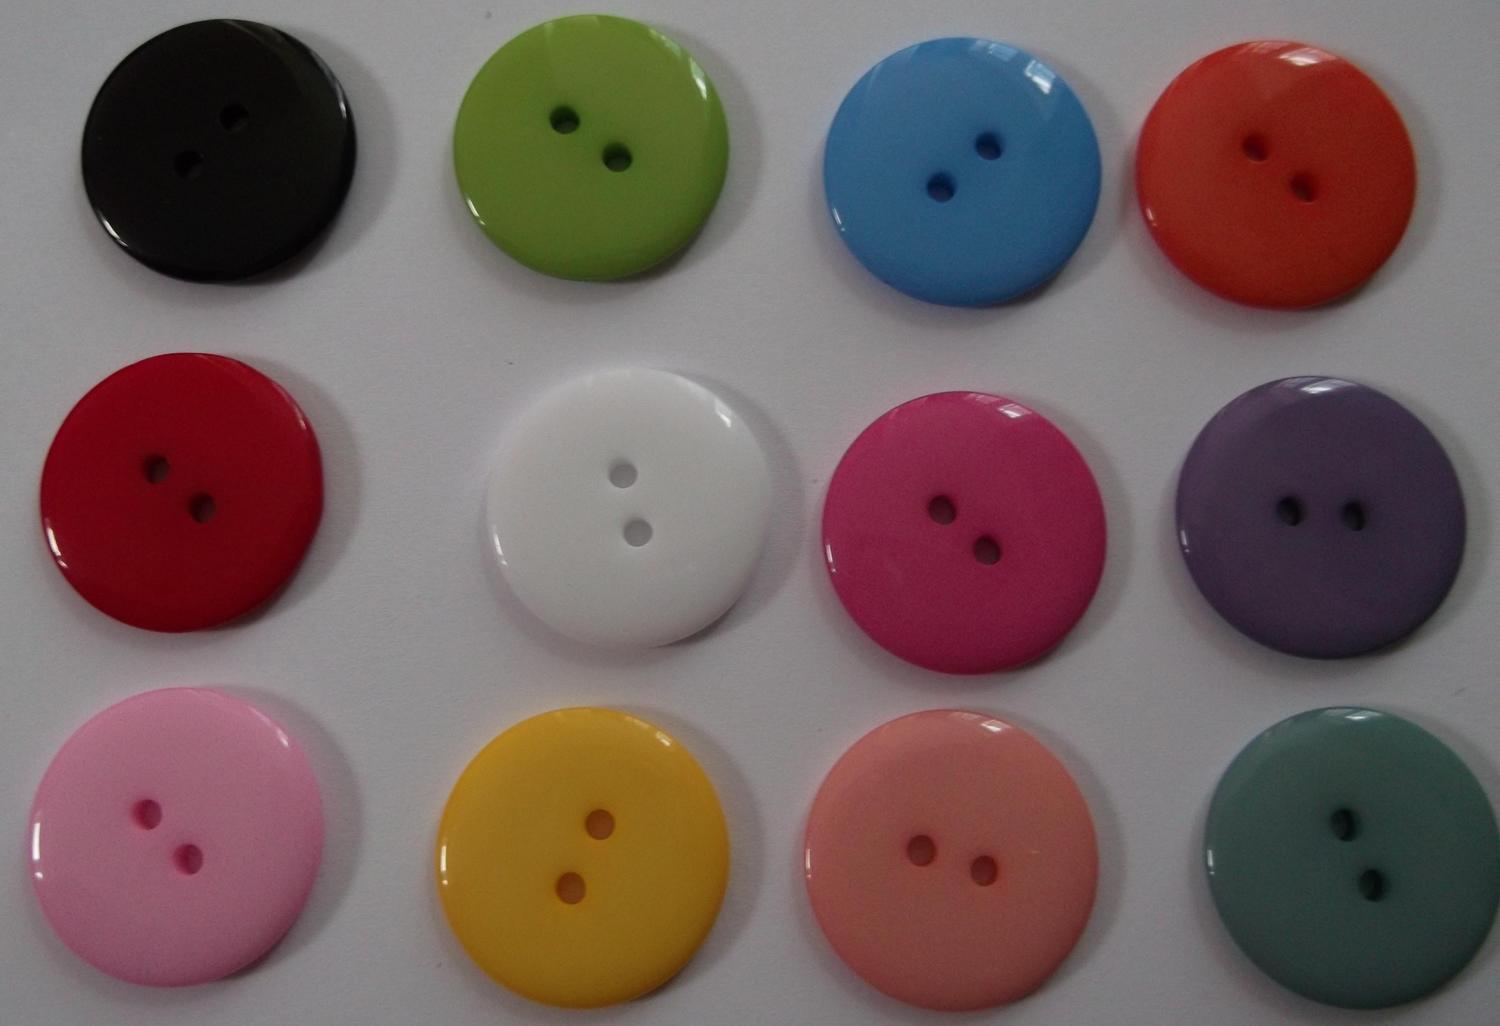 buy buttons for crafts